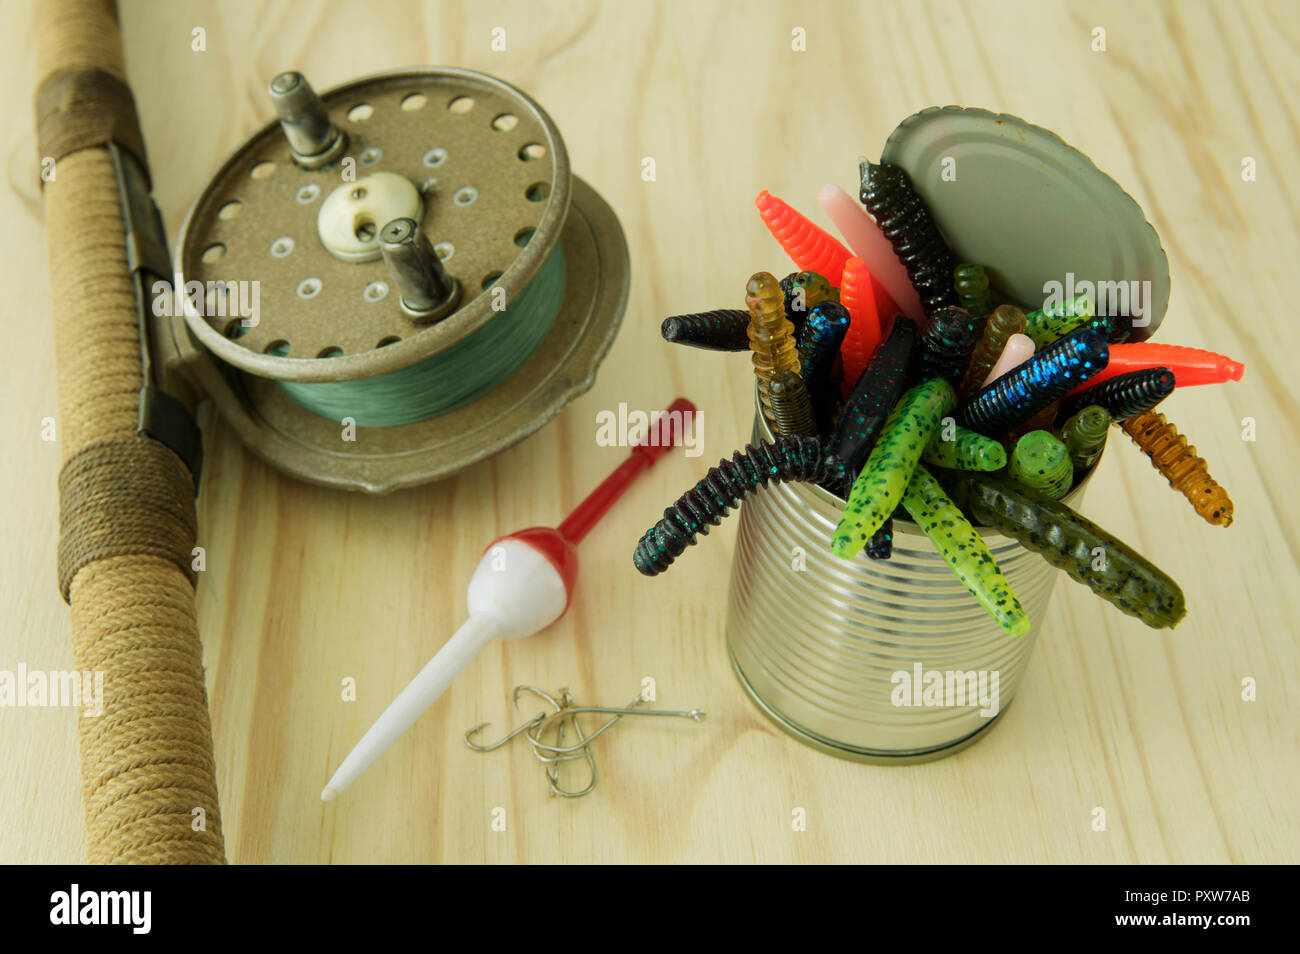 Close-up, detail, can, colourful artificial worms, fishing equipment, catch fish, rod, reel Stock Photo